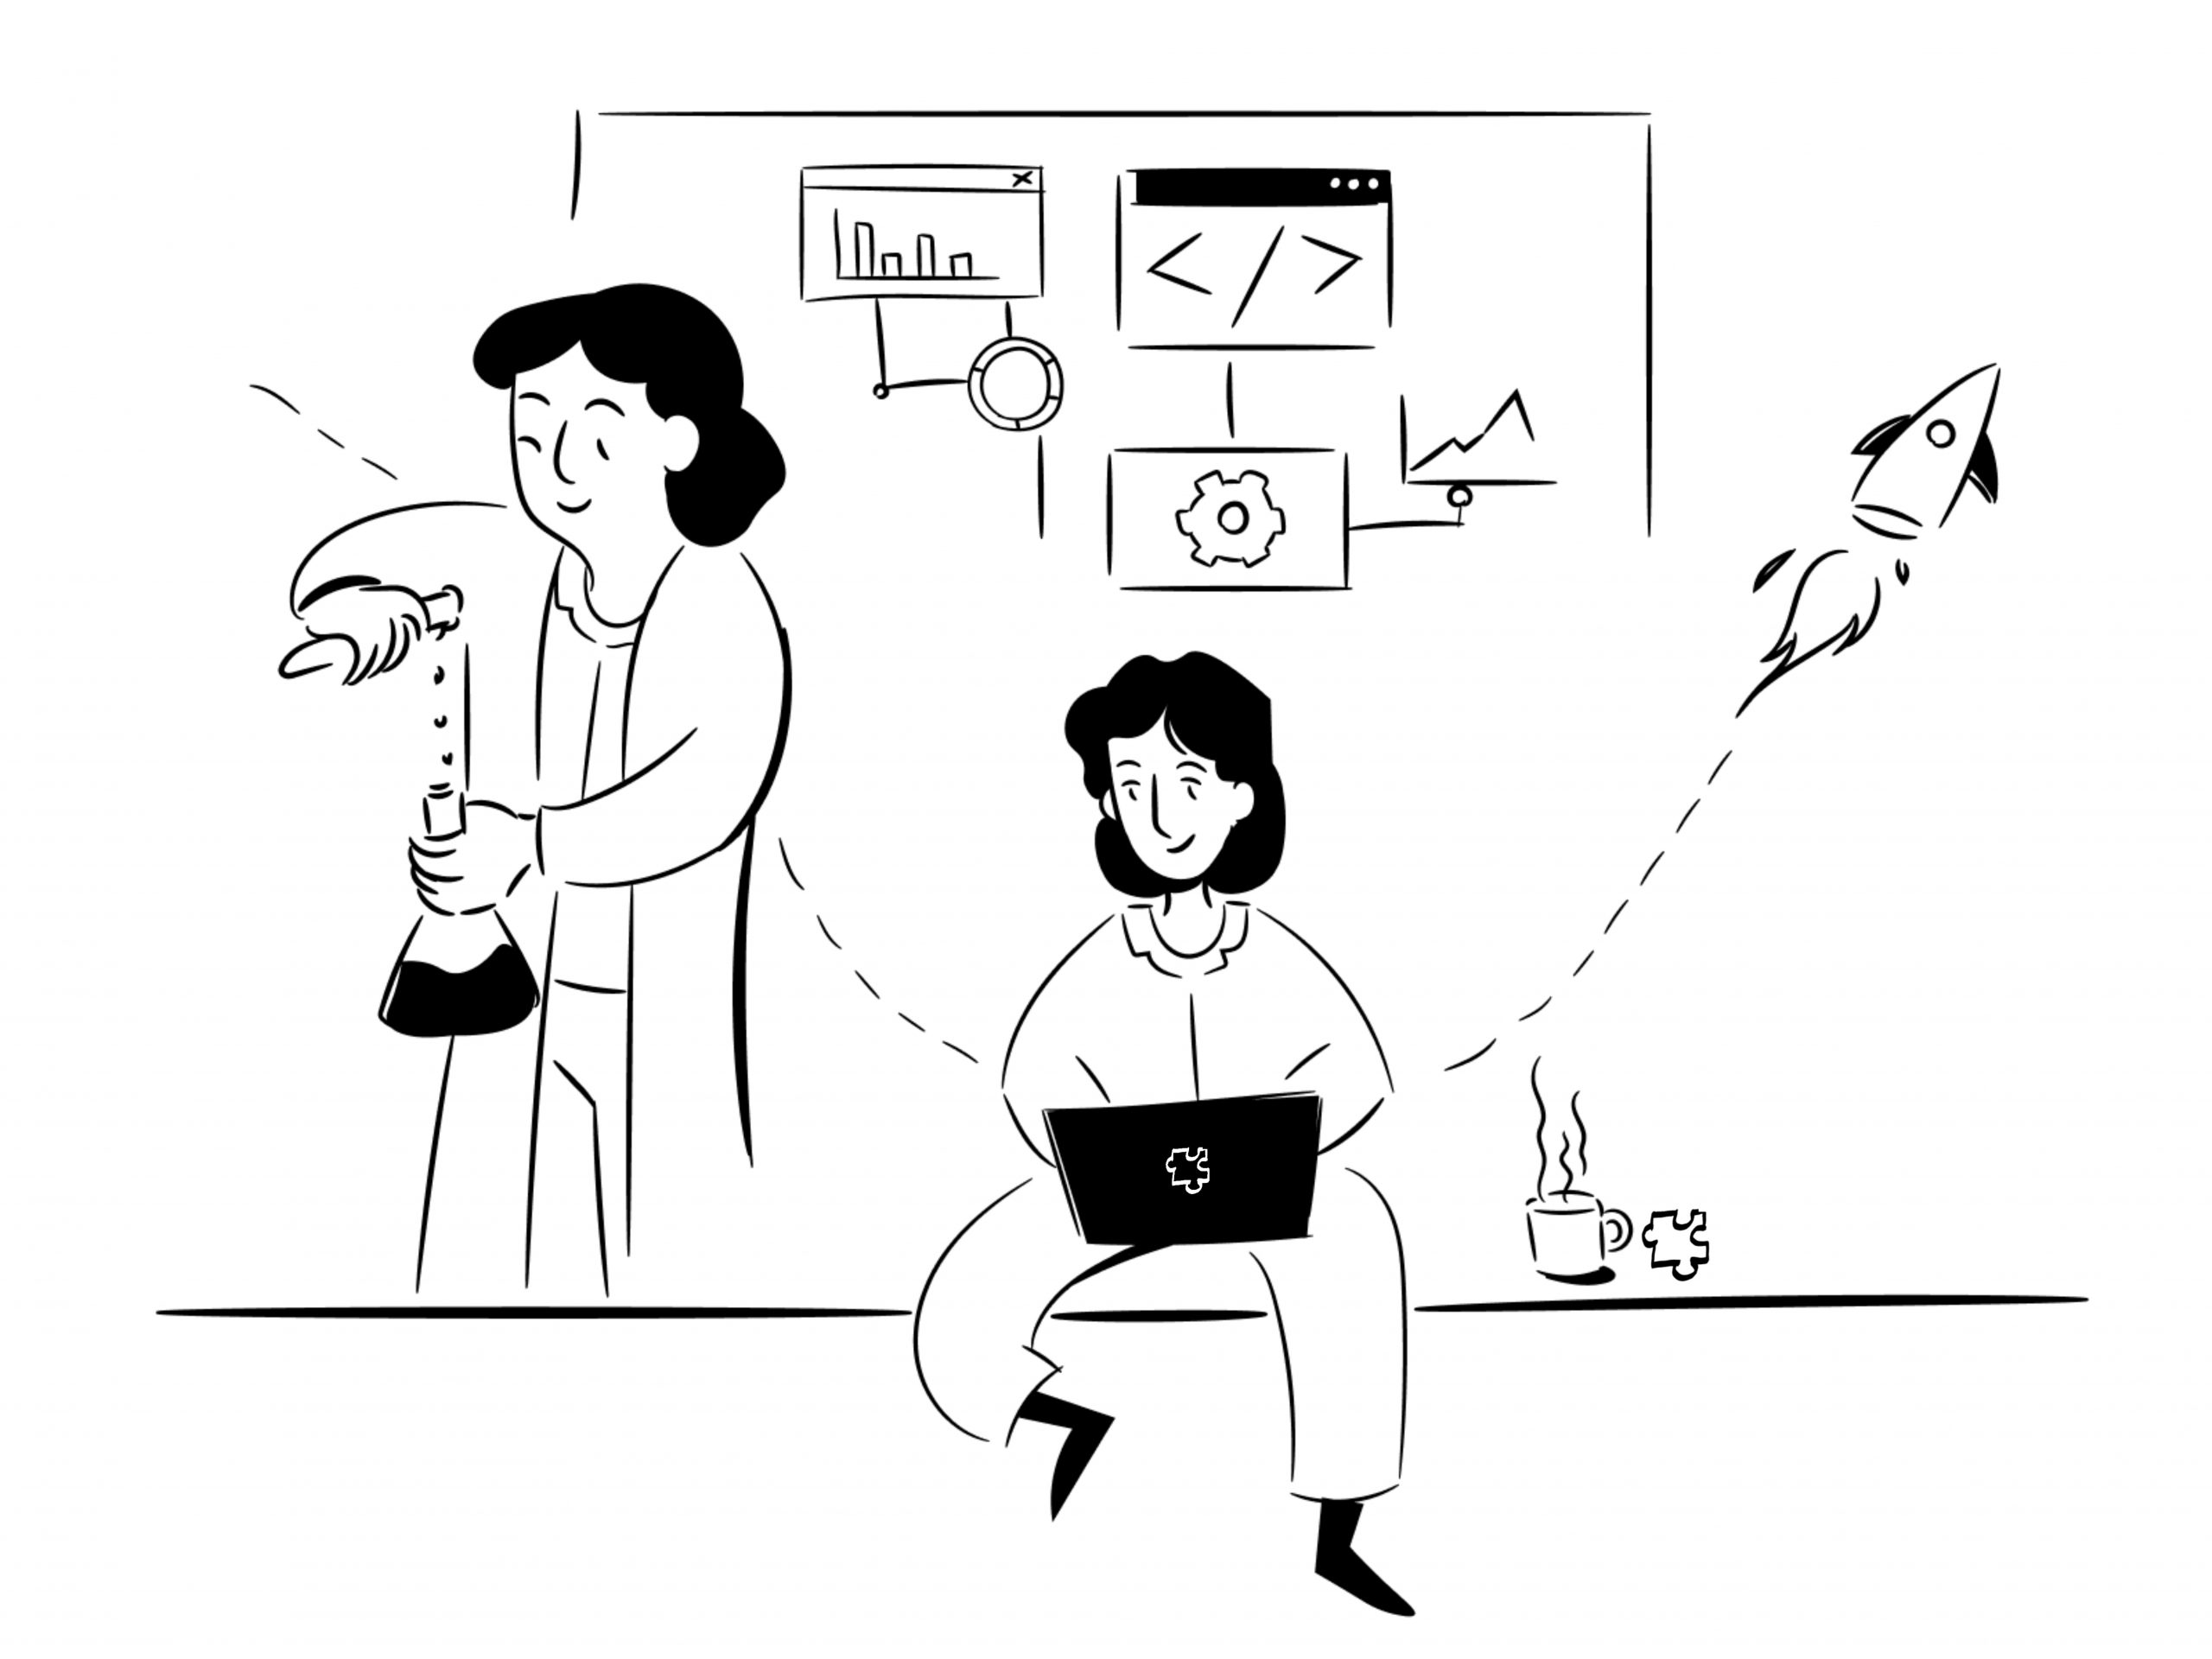 This illustration shows how to test new business ideas and shows a woman experimenting in a lab and on a computer, which leads to innovation.